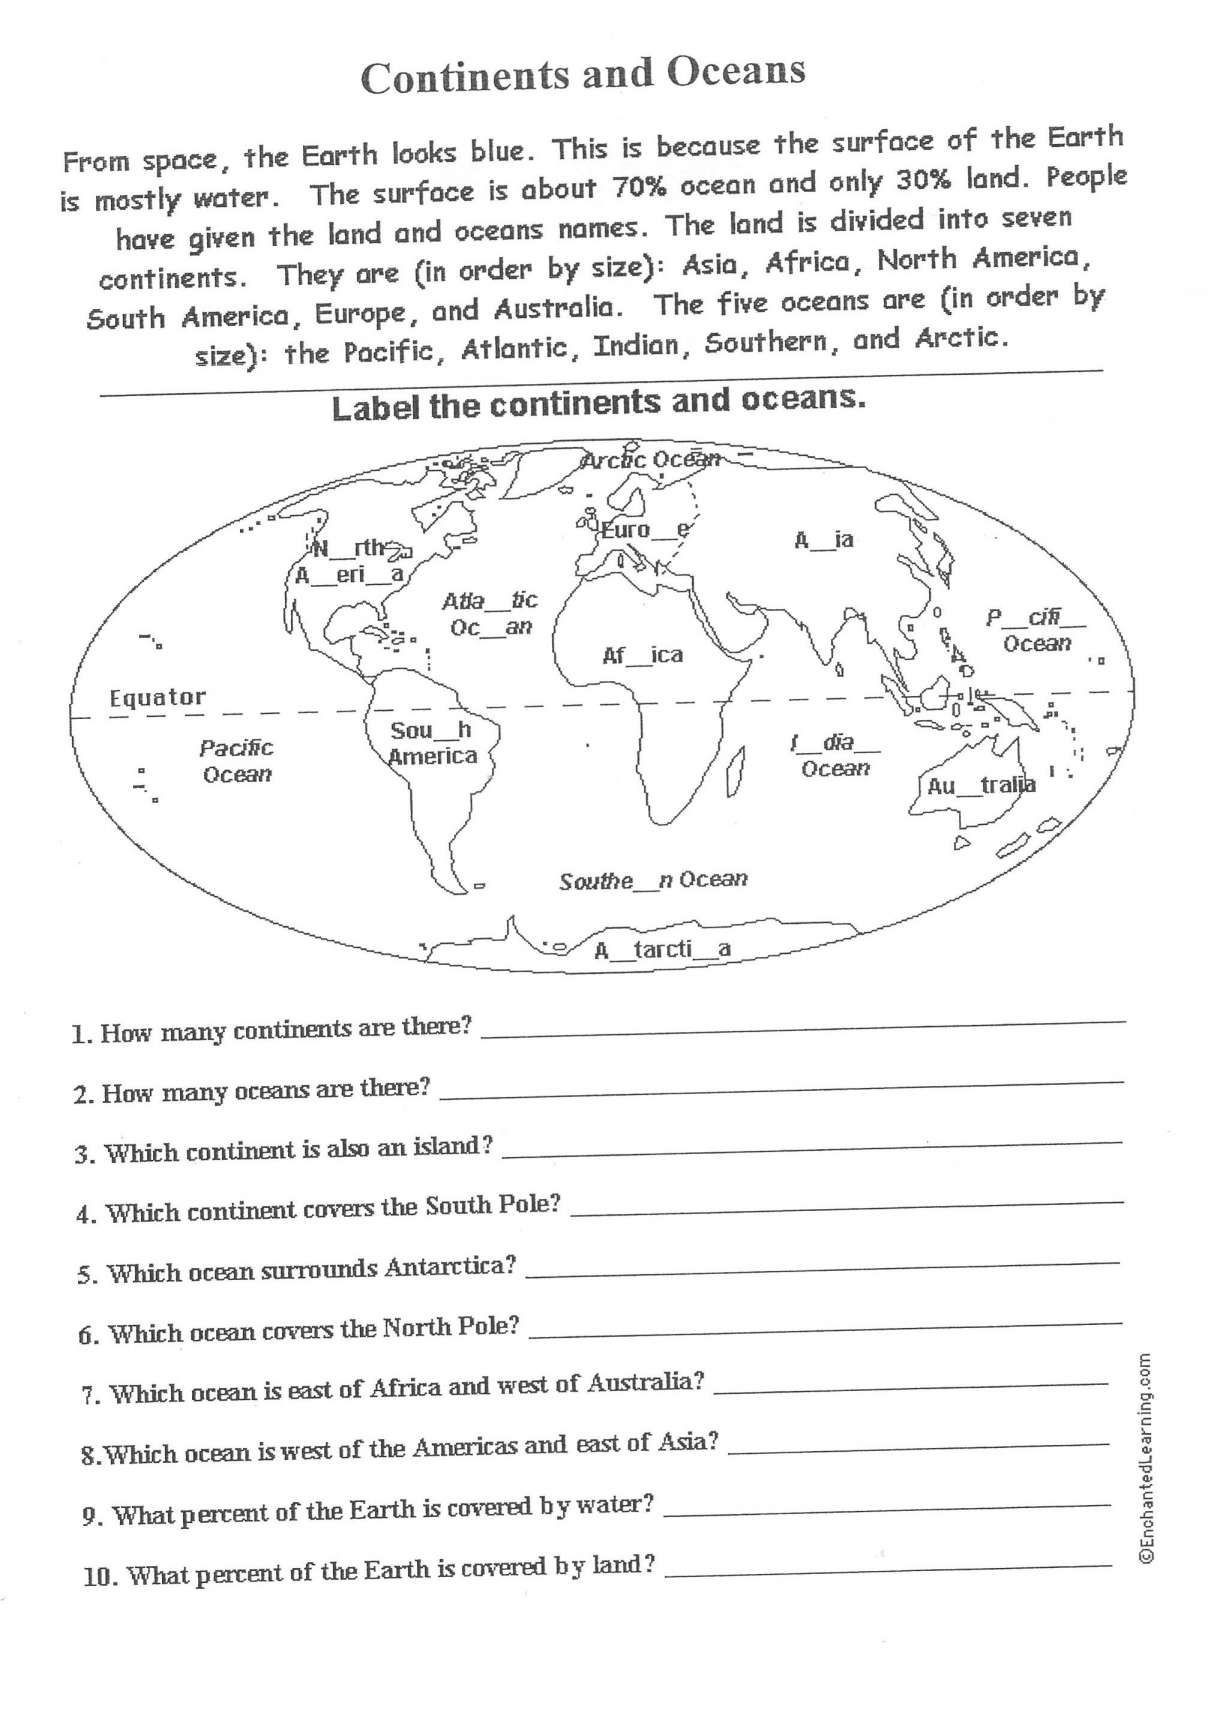 5th Grade Geography Worksheets 8 5th Grade World Geography Worksheets Grade